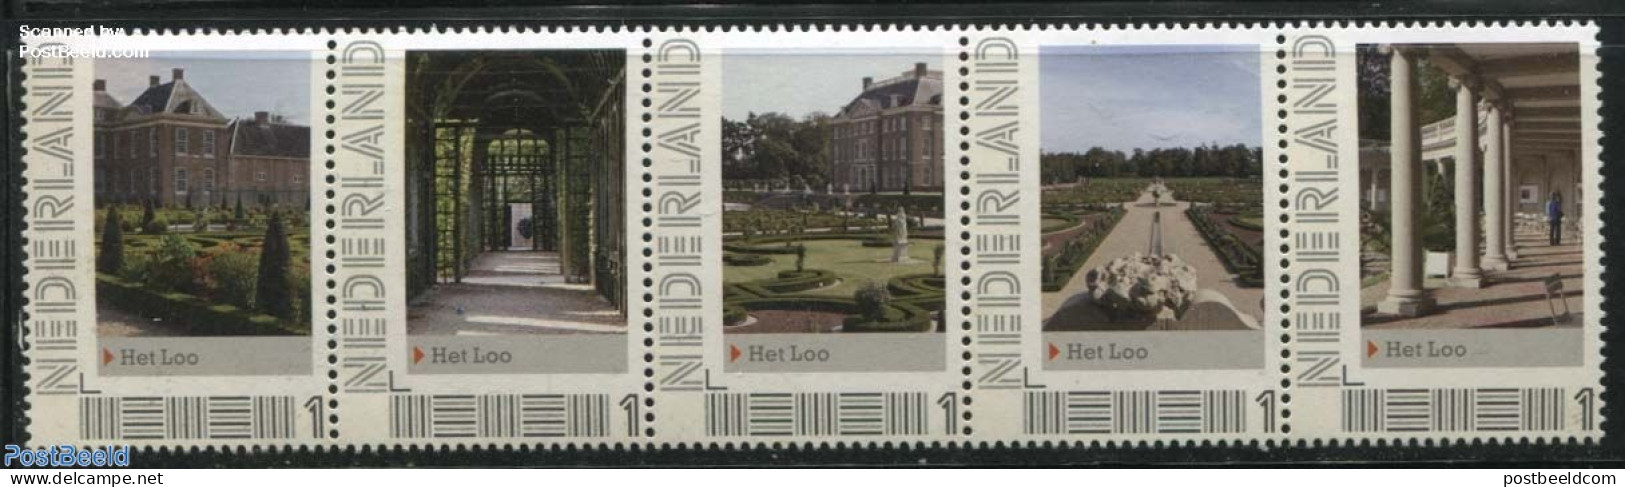 Netherlands - Personal Stamps TNT/PNL 2012 Het Loo 5V [::::], Mint NH, Nature - Trees & Forests - Art - Castles & Fort.. - Rotary, Club Leones